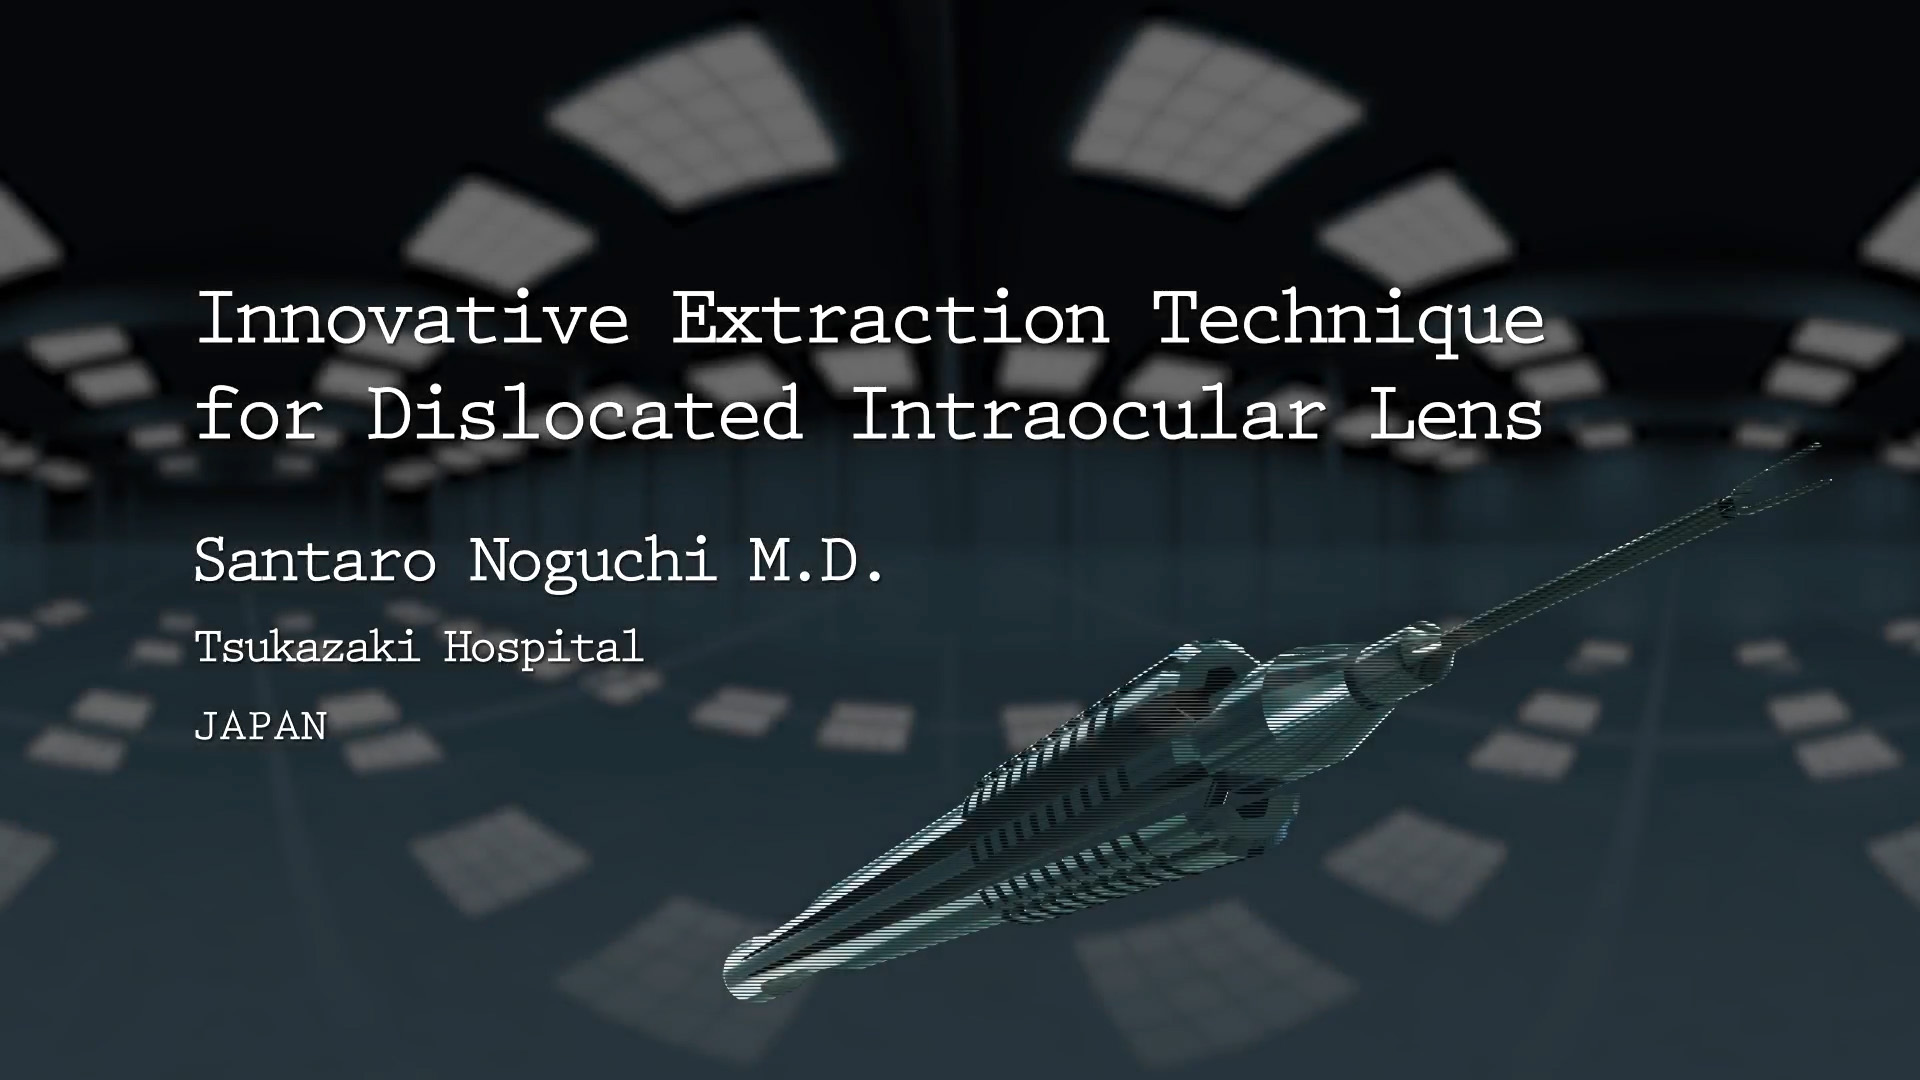 Innovative Extraction Technique for Dislocated Intraocular Lens